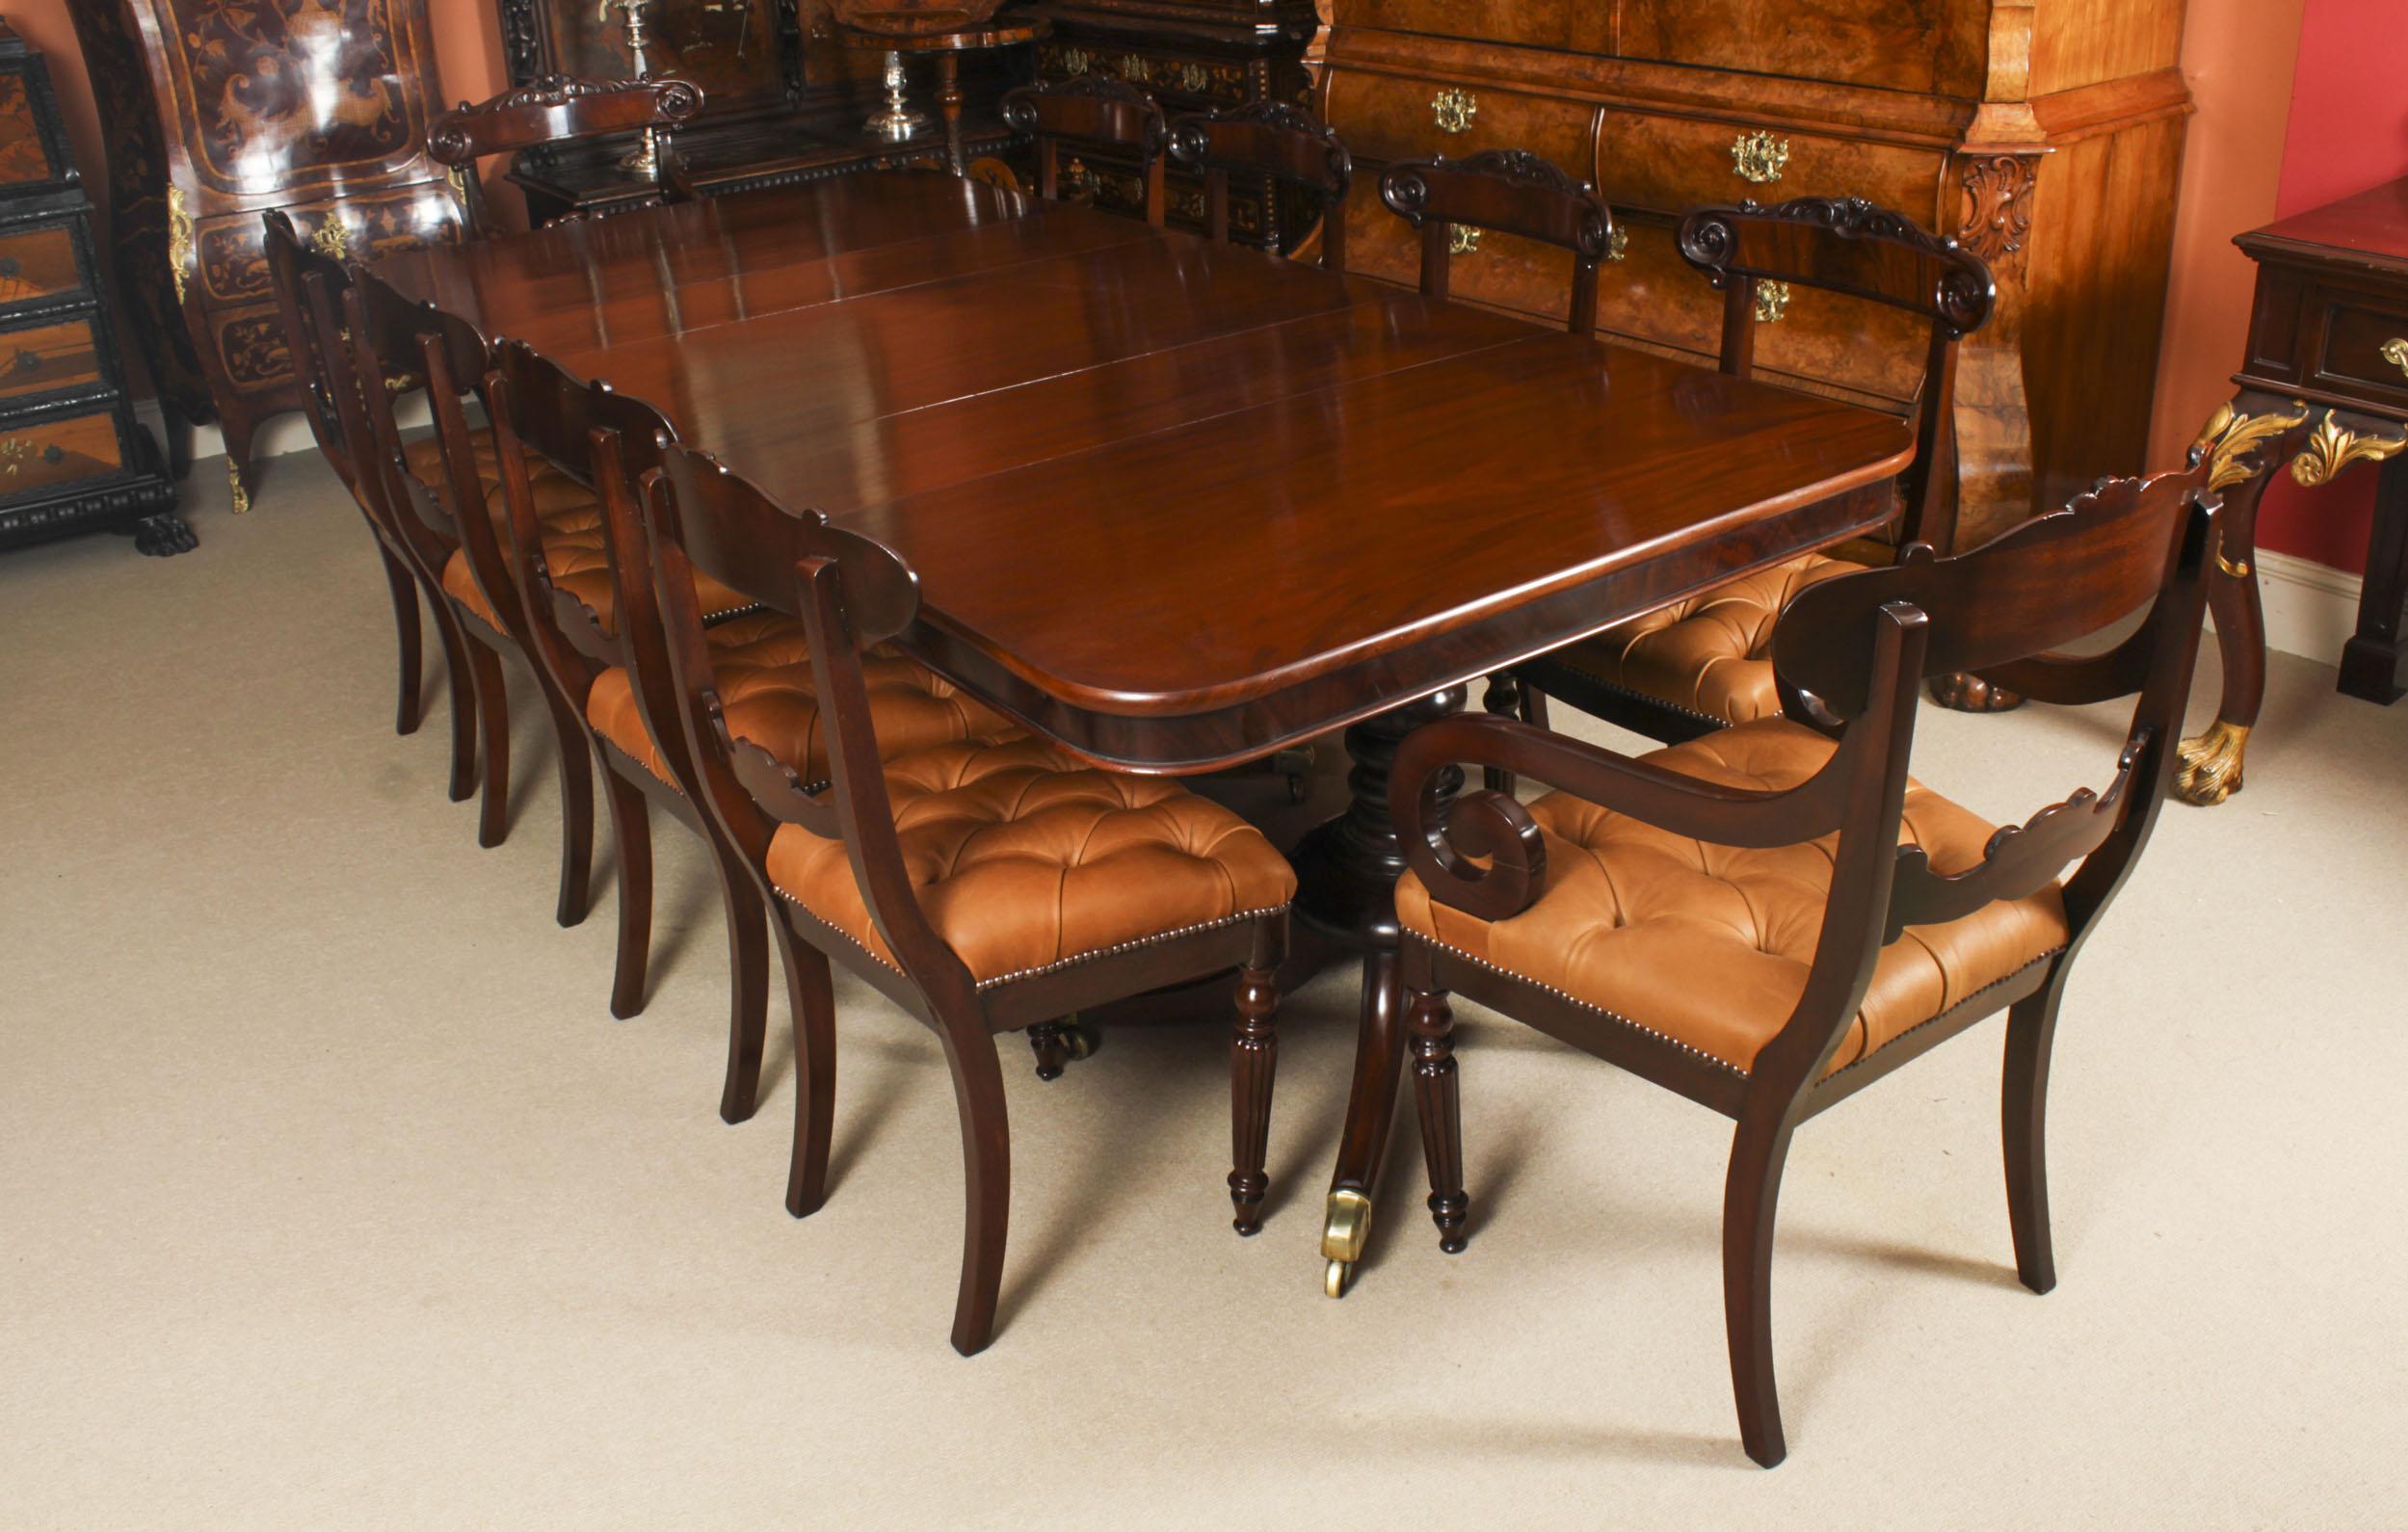 This is a fabulous high quality antique flame mahogany Regency Period metamorphic triple pillar  dining table that can seat 10 people in comfort, dating from Circa 1820.
 
It is raised on three bases, each with four sabre legs that terminate in